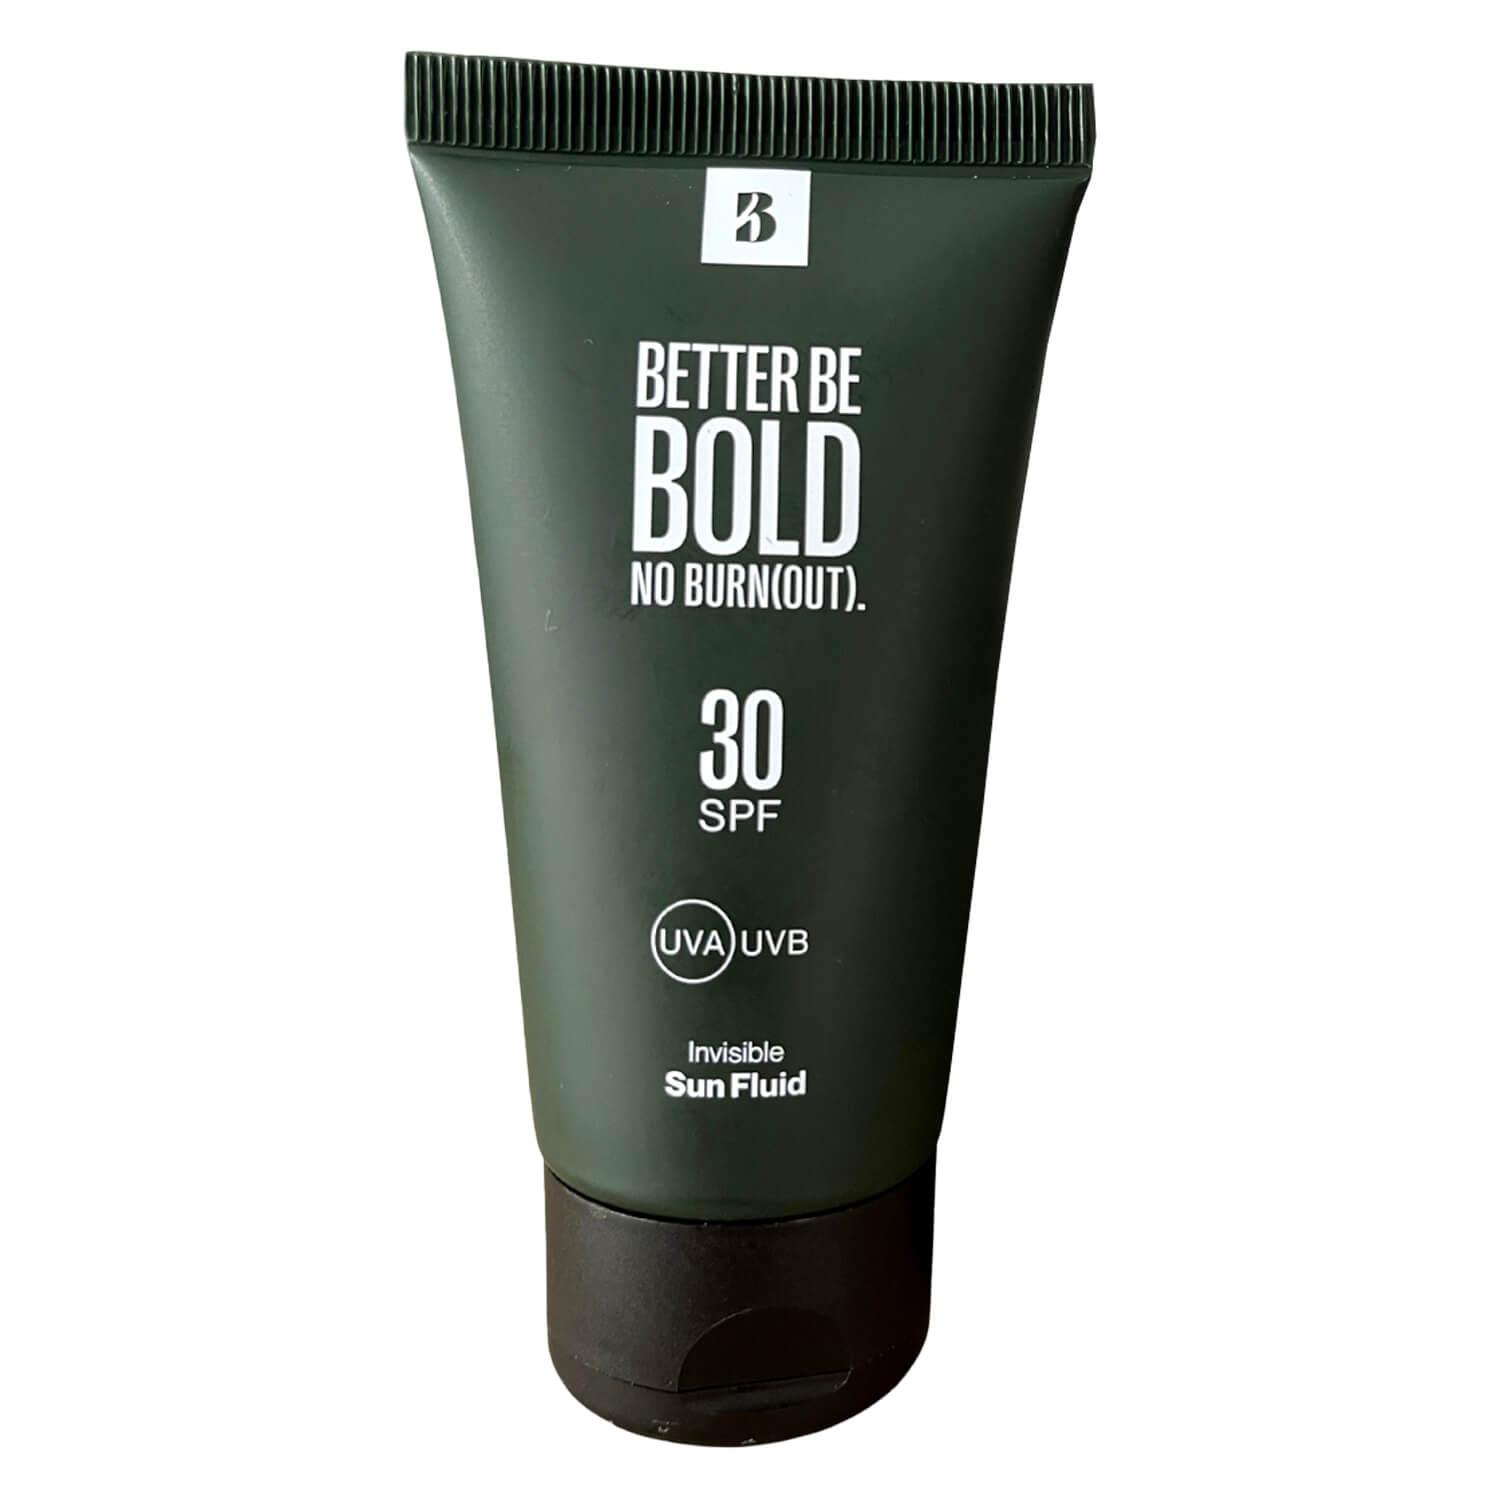 BETTER BE BOLD -  Invisible Sun Fluid SPF 30